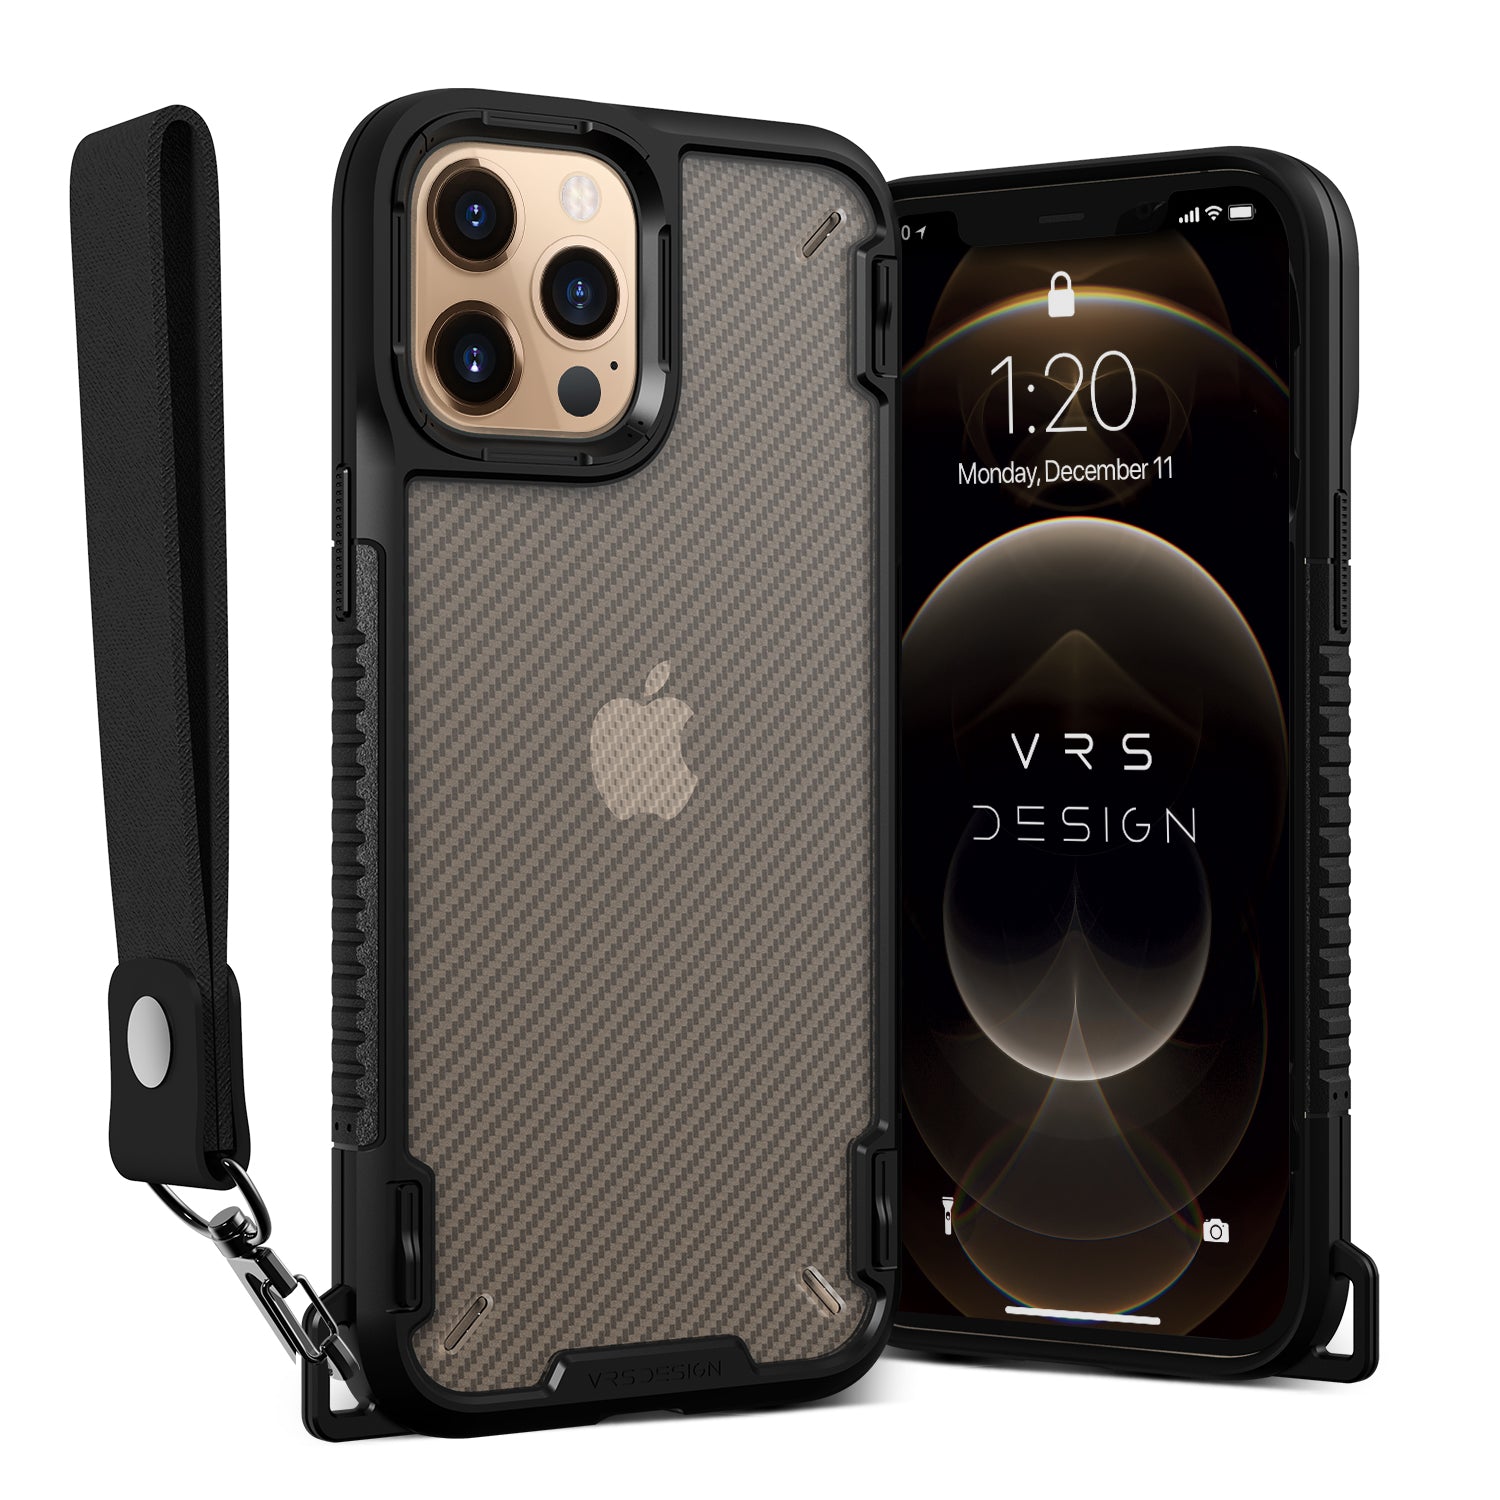 RhinoShield SolidSuit Case for iPhone 12 Pro Max SSA0118777 B&H